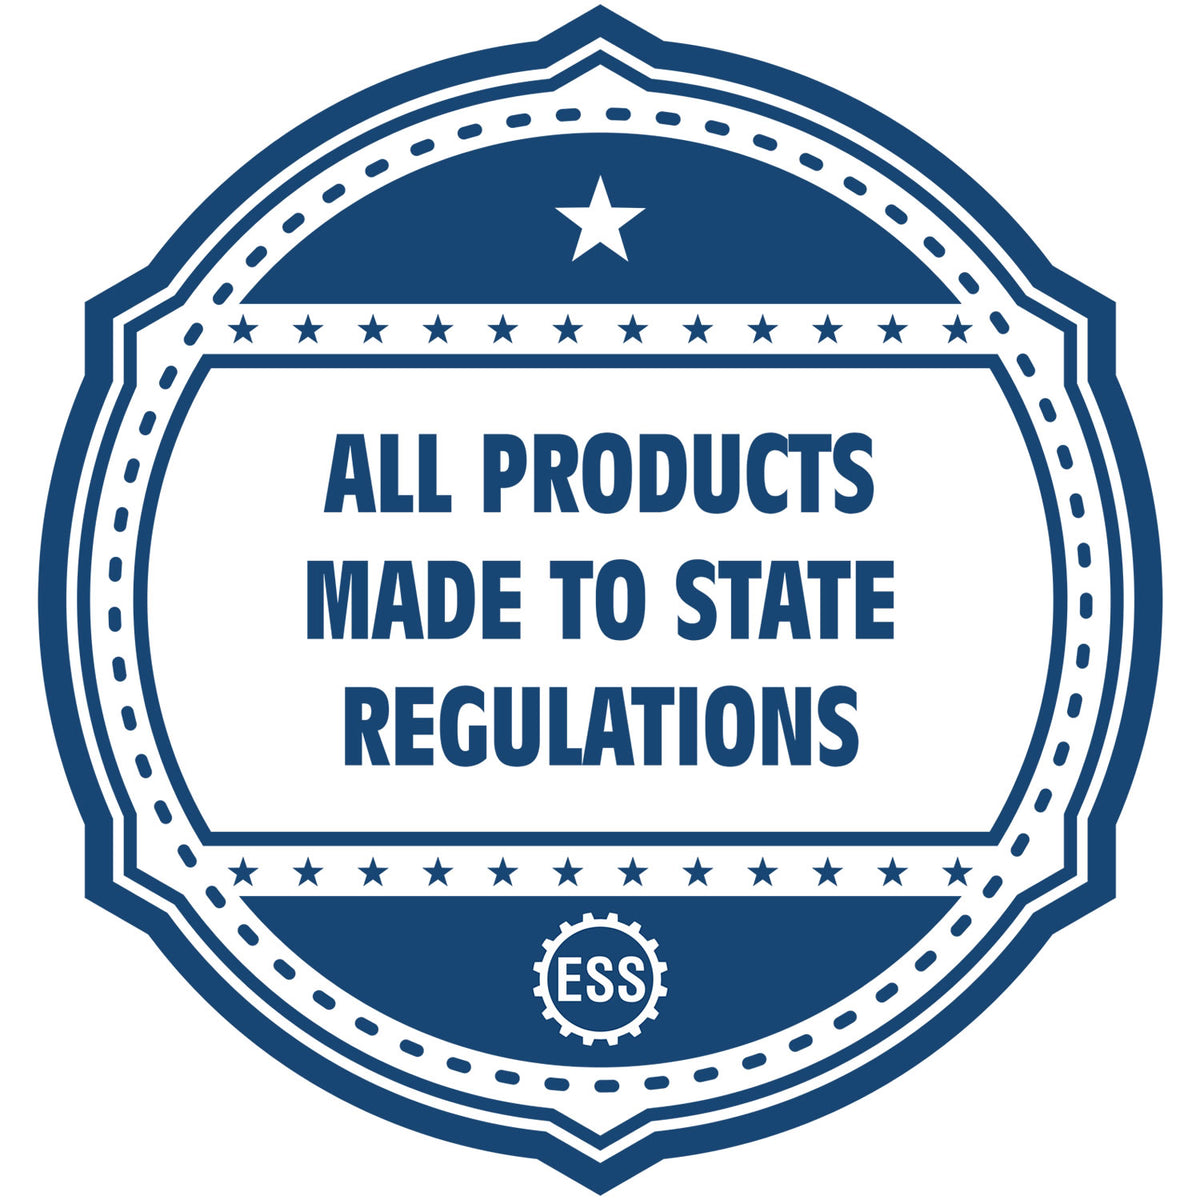 An icon or badge element for the Michigan Desk Architect Embossing Seal showing that this product is made in compliance with state regulations.